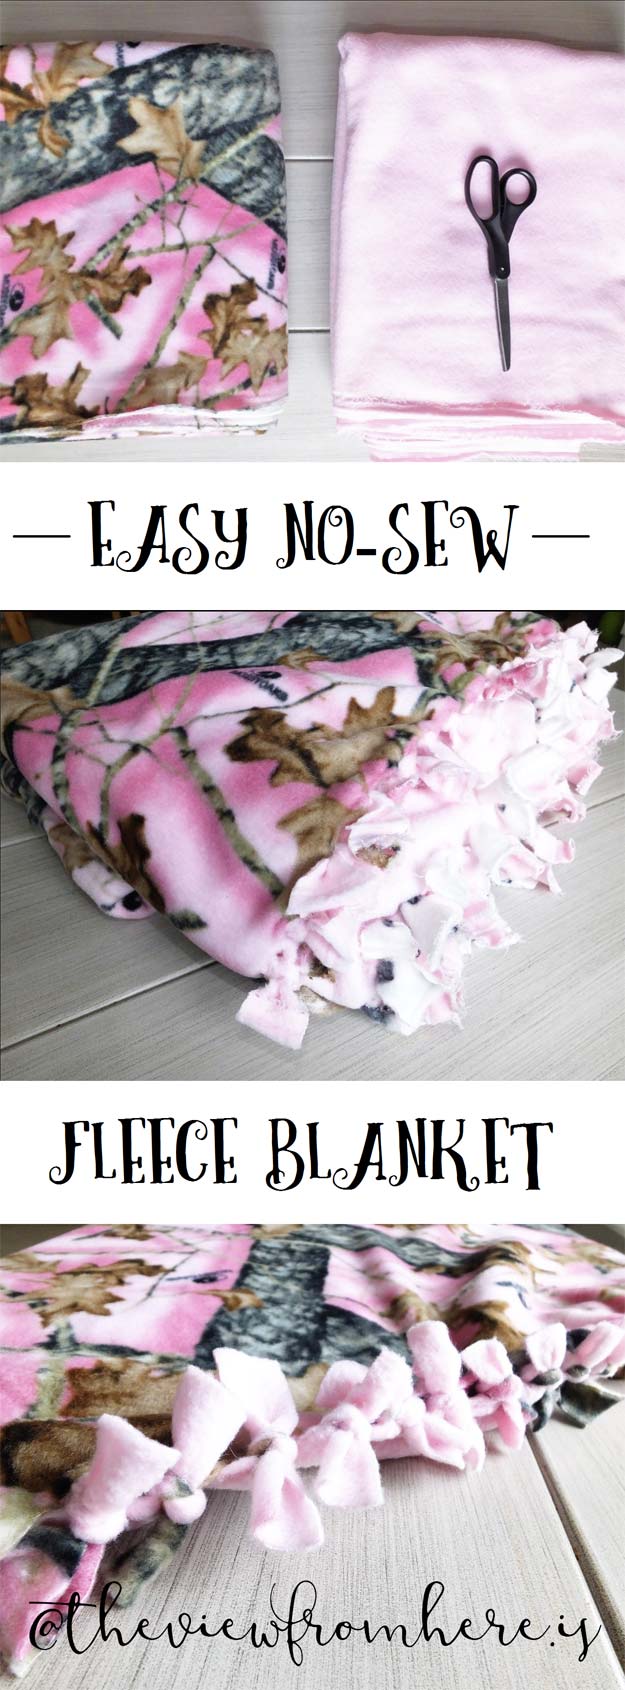 Cool DIY Ideas for Your Bed - DIY No-Sew Fleece Blanket - Fun Bedding, Pillows, Blankets, Home Decor and Crafts to Make Your Bedroom Awesome - Easy Step by Step Tutorials for Making A T-Shirt Pillow, Knit Throws, Fuzzy and Furry Warm Blankets and Handmade DYI Bedding, Sheets, Bedskirts and Shams 